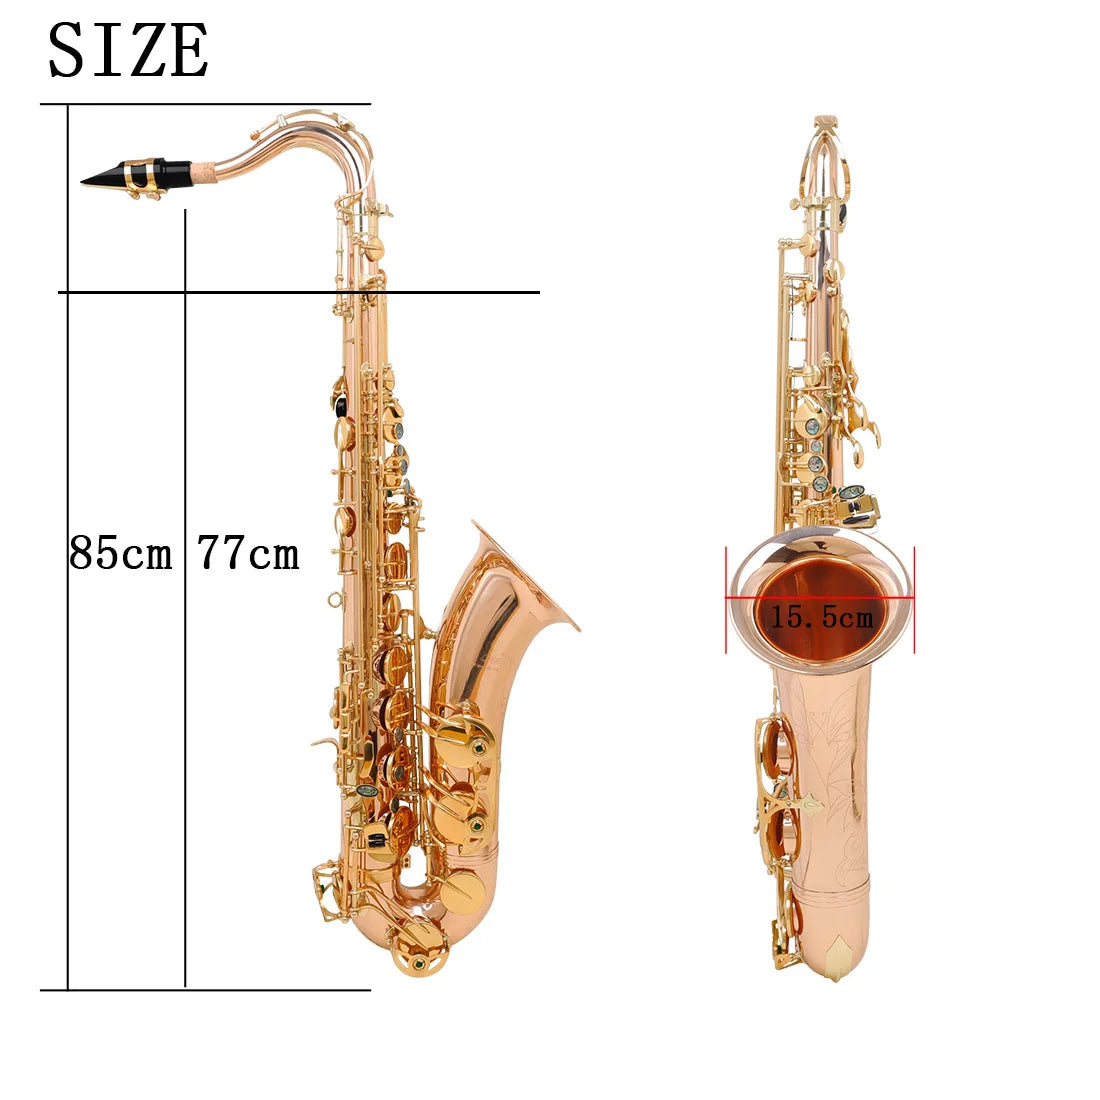 SALDE Tenor Saxophone Brass B-Flat Tenor Laser Engraved Sax Woodwind Instrument With Carrying Case Gloves Parts & Accessories